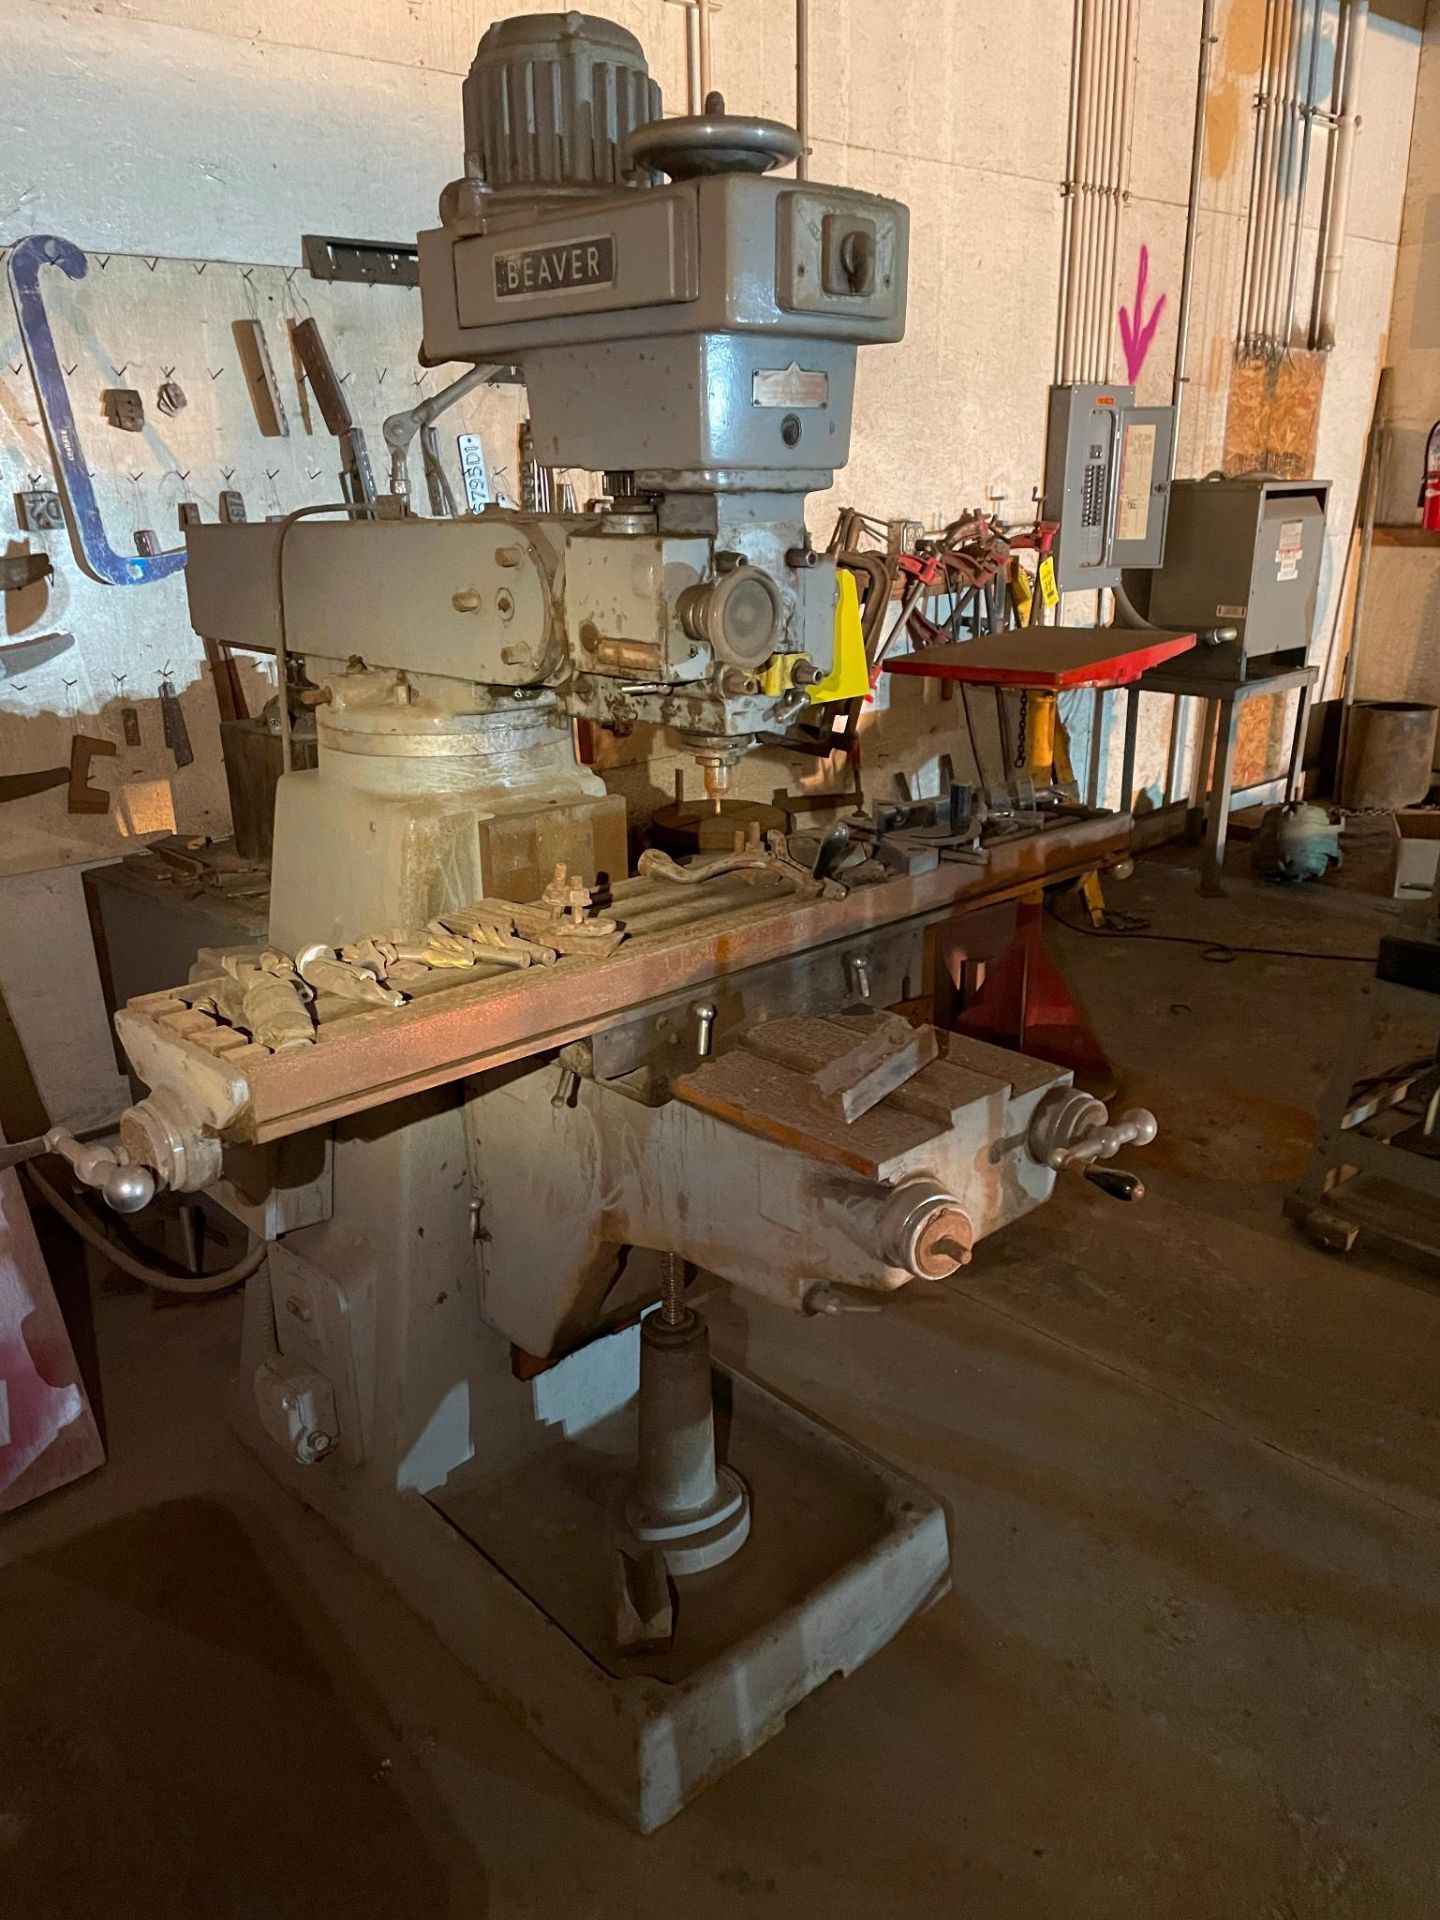 VERTICAL MILLING MACHINE, BEAVER MDL. VBRP, table size approx. 56" x 10", S/N 3535/2 - Image 2 of 3